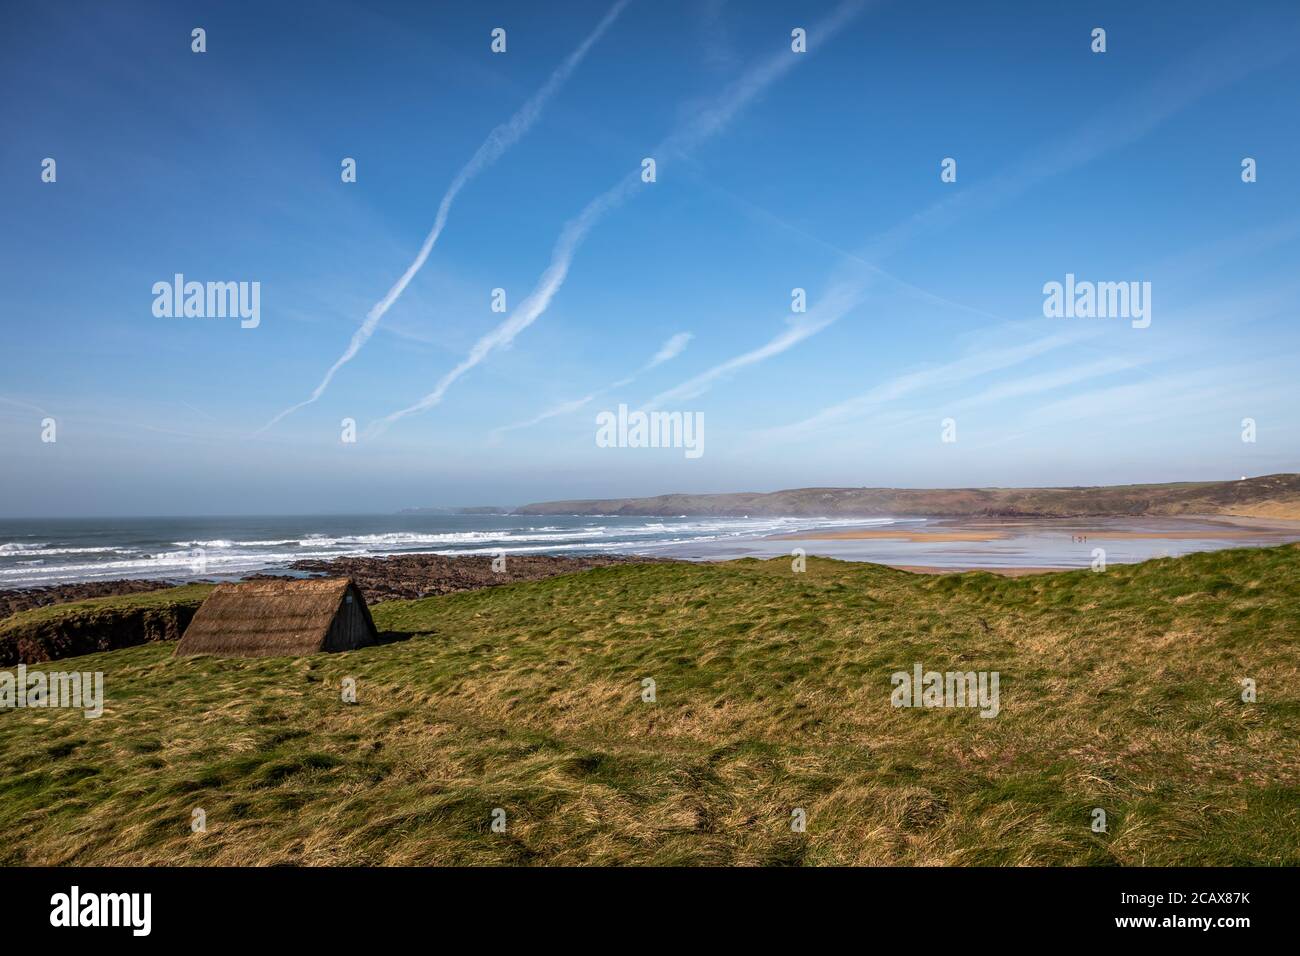 Drying Hut, Freshwater West Beach, Pembrokeshire, Galles, Regno Unito Foto Stock